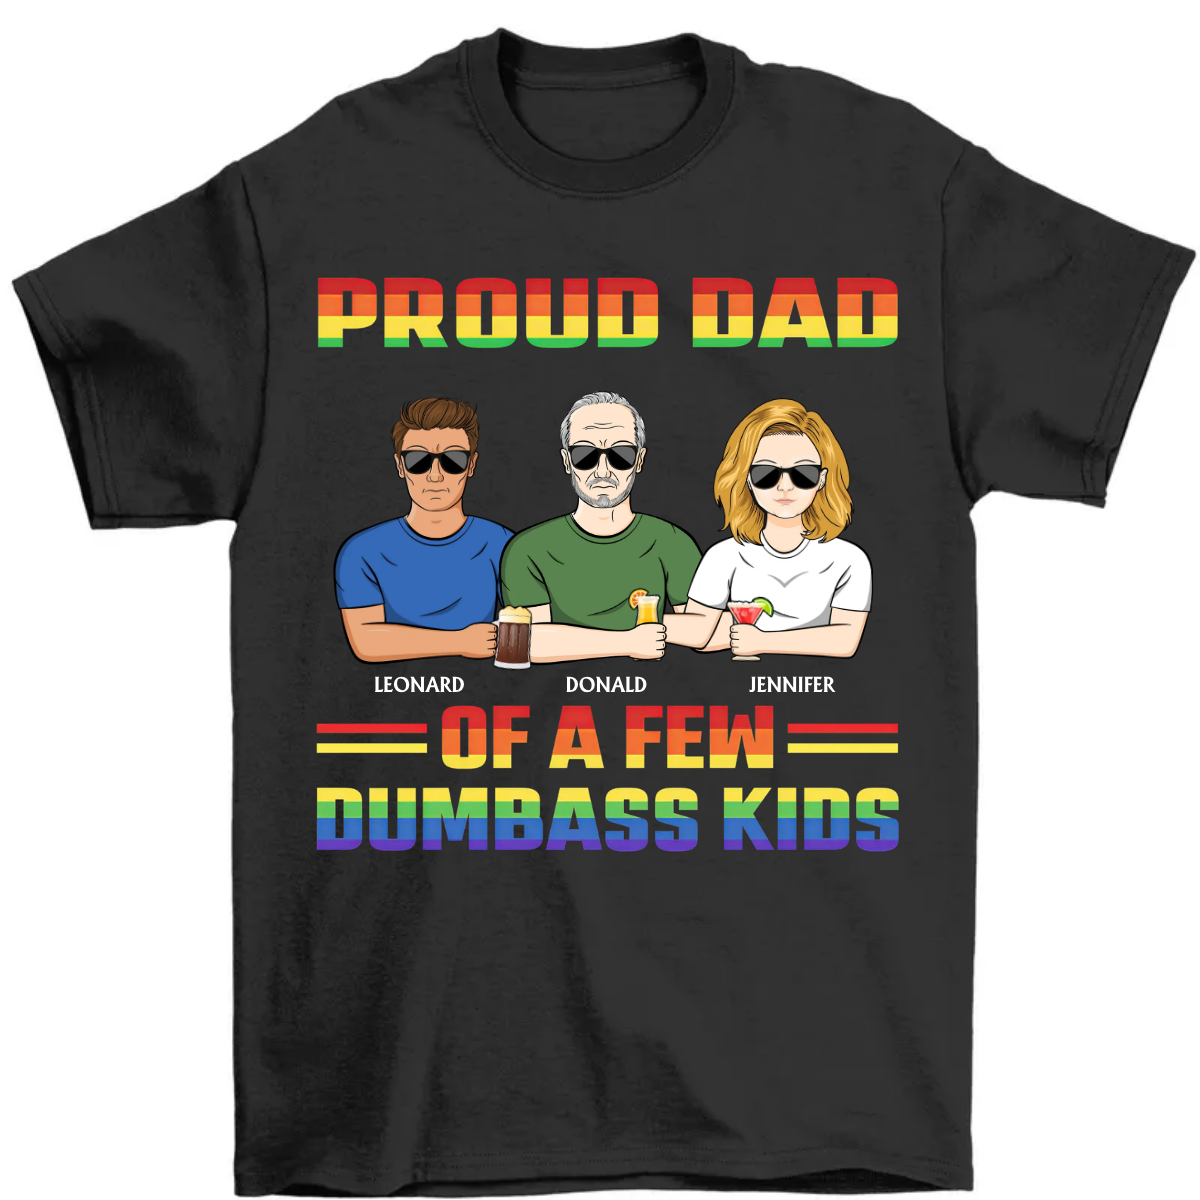 Proud Dad Of A Few - Funny Gift For Pride Dad, Father, Grandpa - Personalized T Shirt